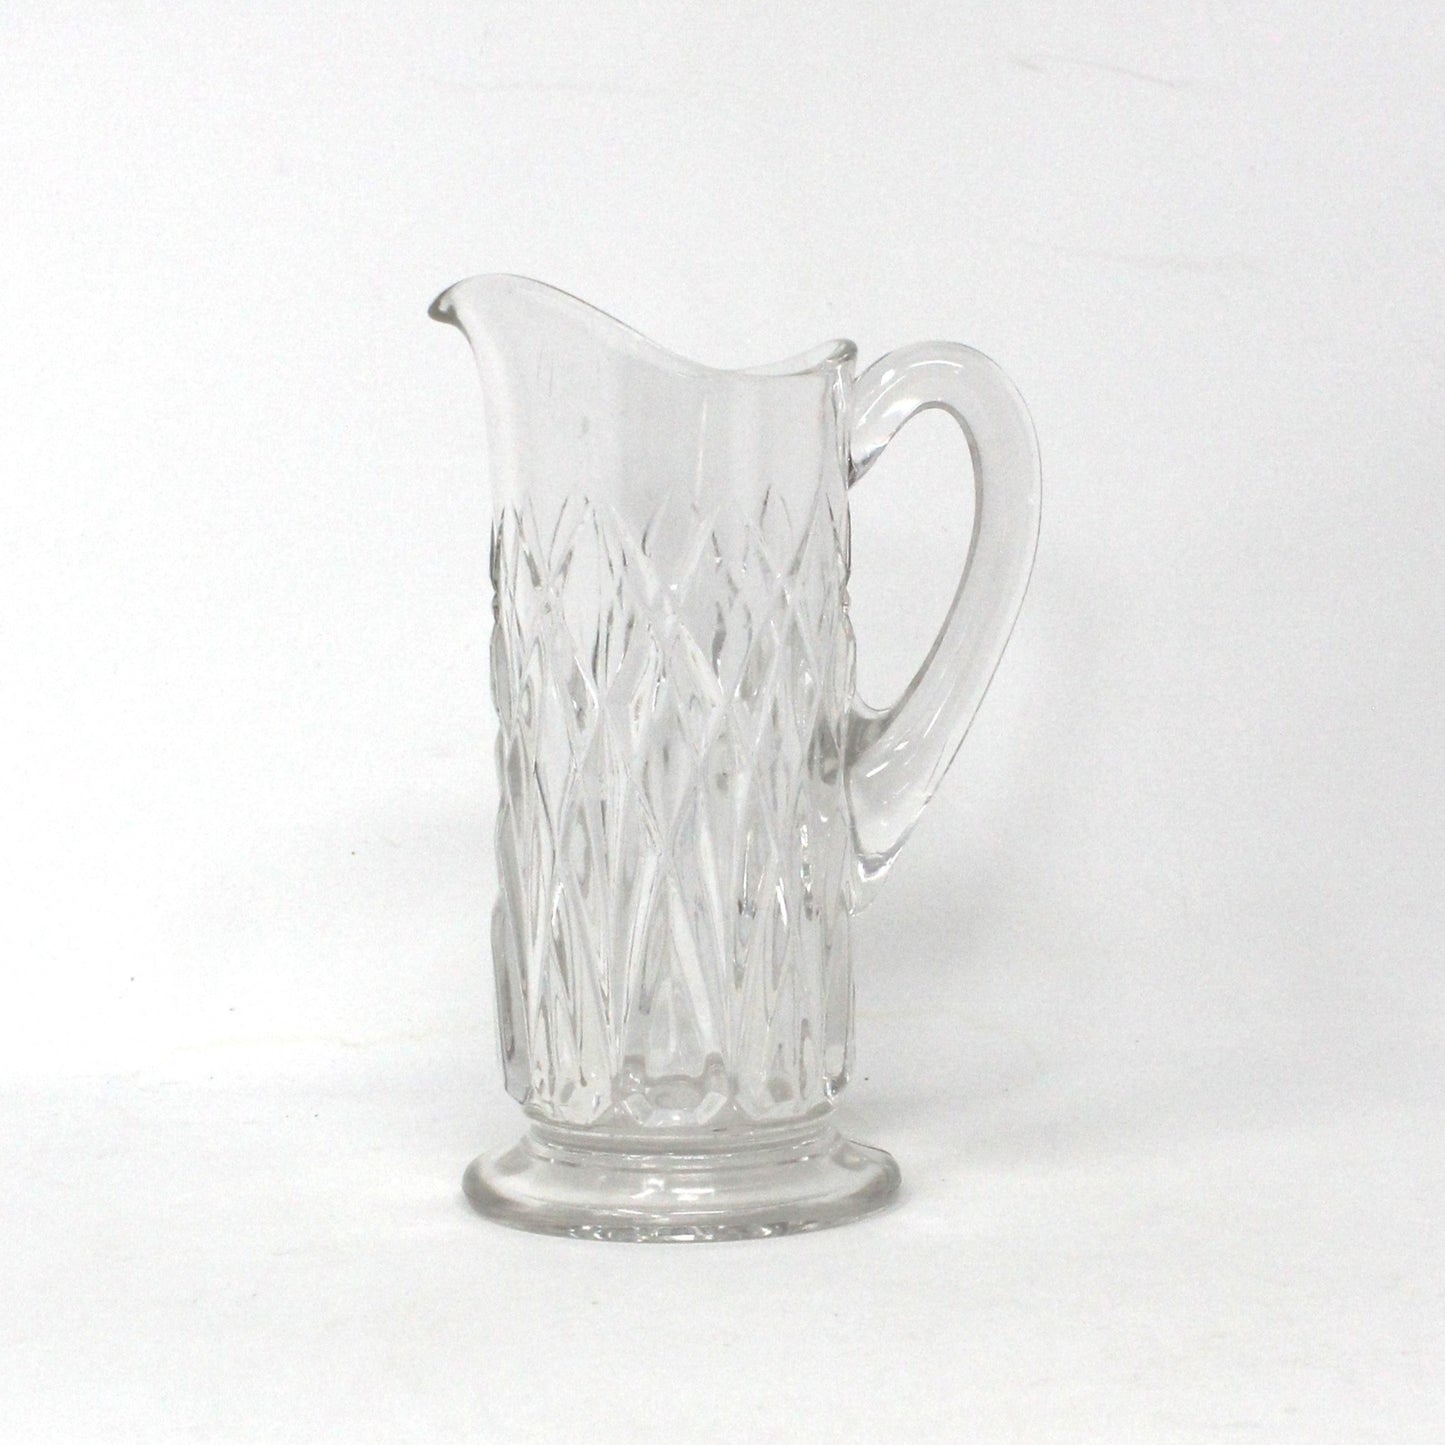 Pitcher, Small Cut Glass Pitcher, Arches, Vintage